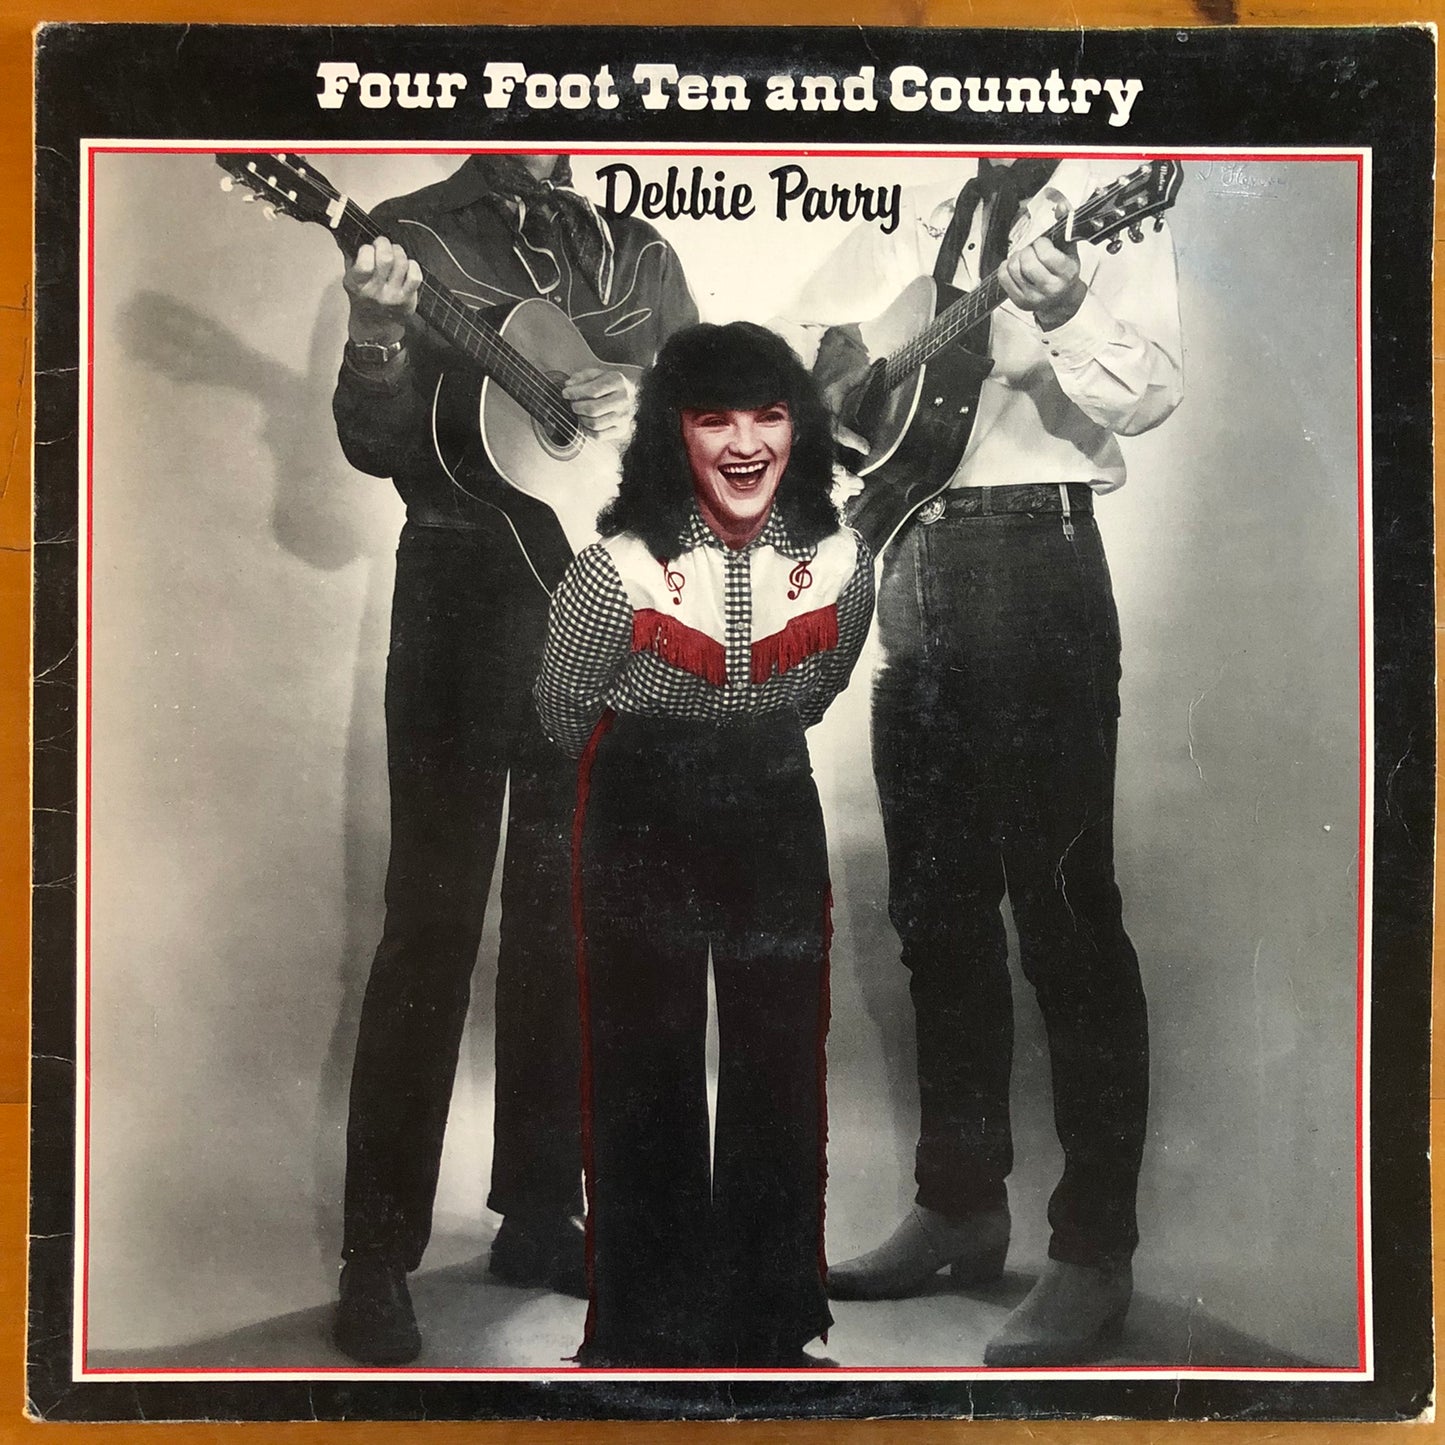 Debbie Parry - Four Foot Ten and Country